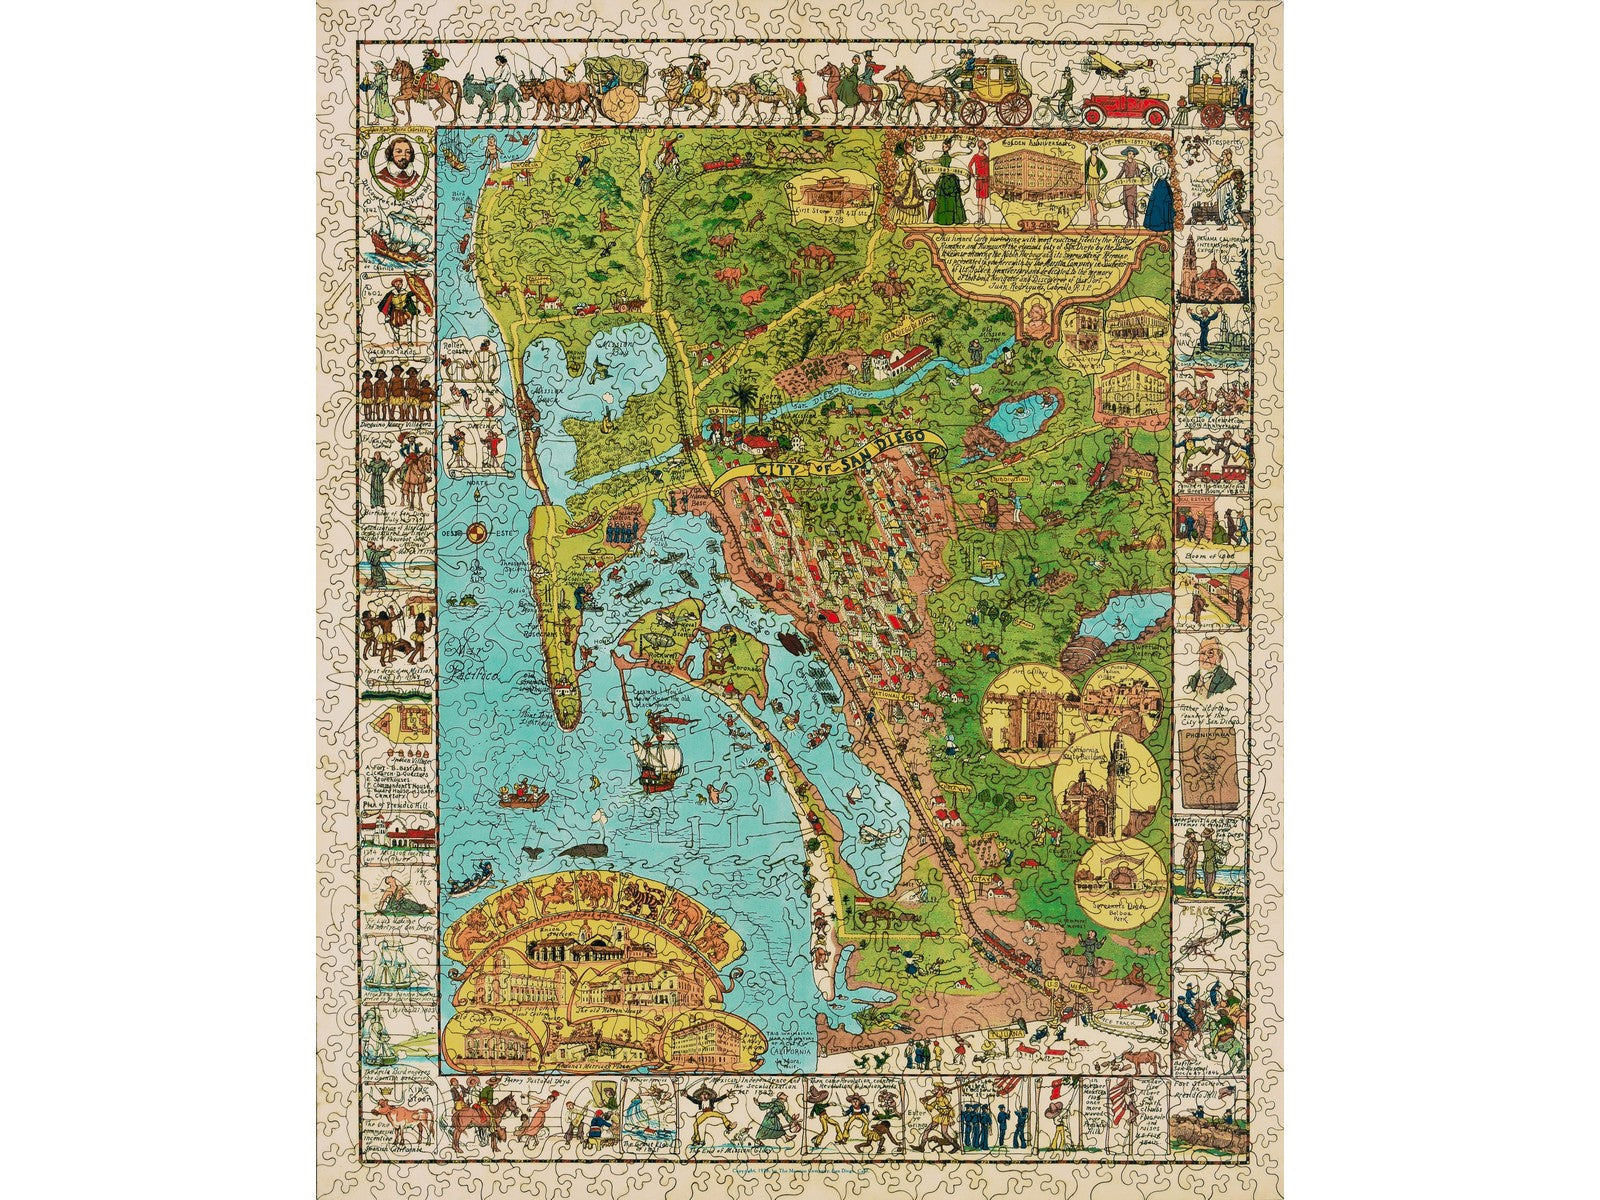 The front of the puzzle, A Whimsical Map of San Diego, which shows an old map of the San Diego area.